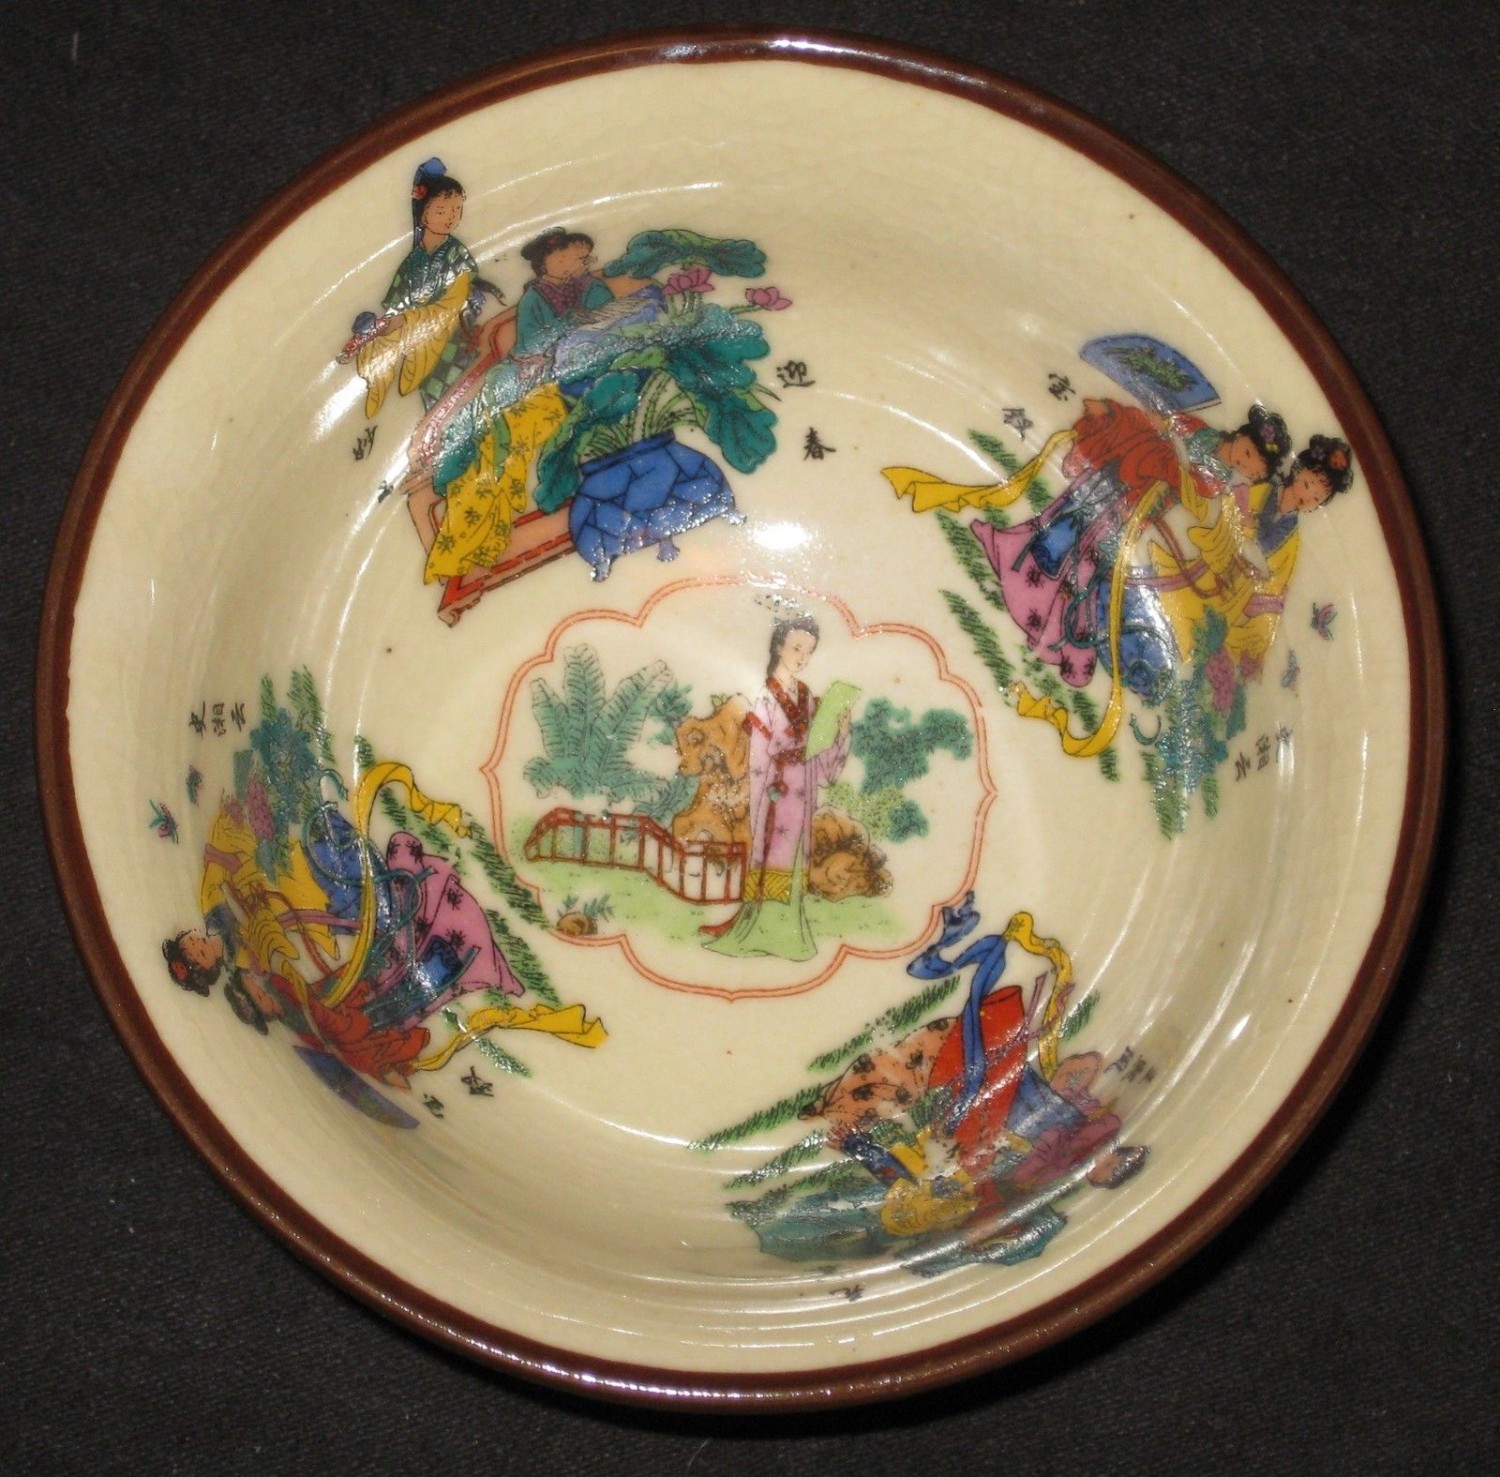 ANTIQUE CHINESE PORCELAIN HAND PAINTED BOWL, 19TH CENTURY - QIANLONG MARK.